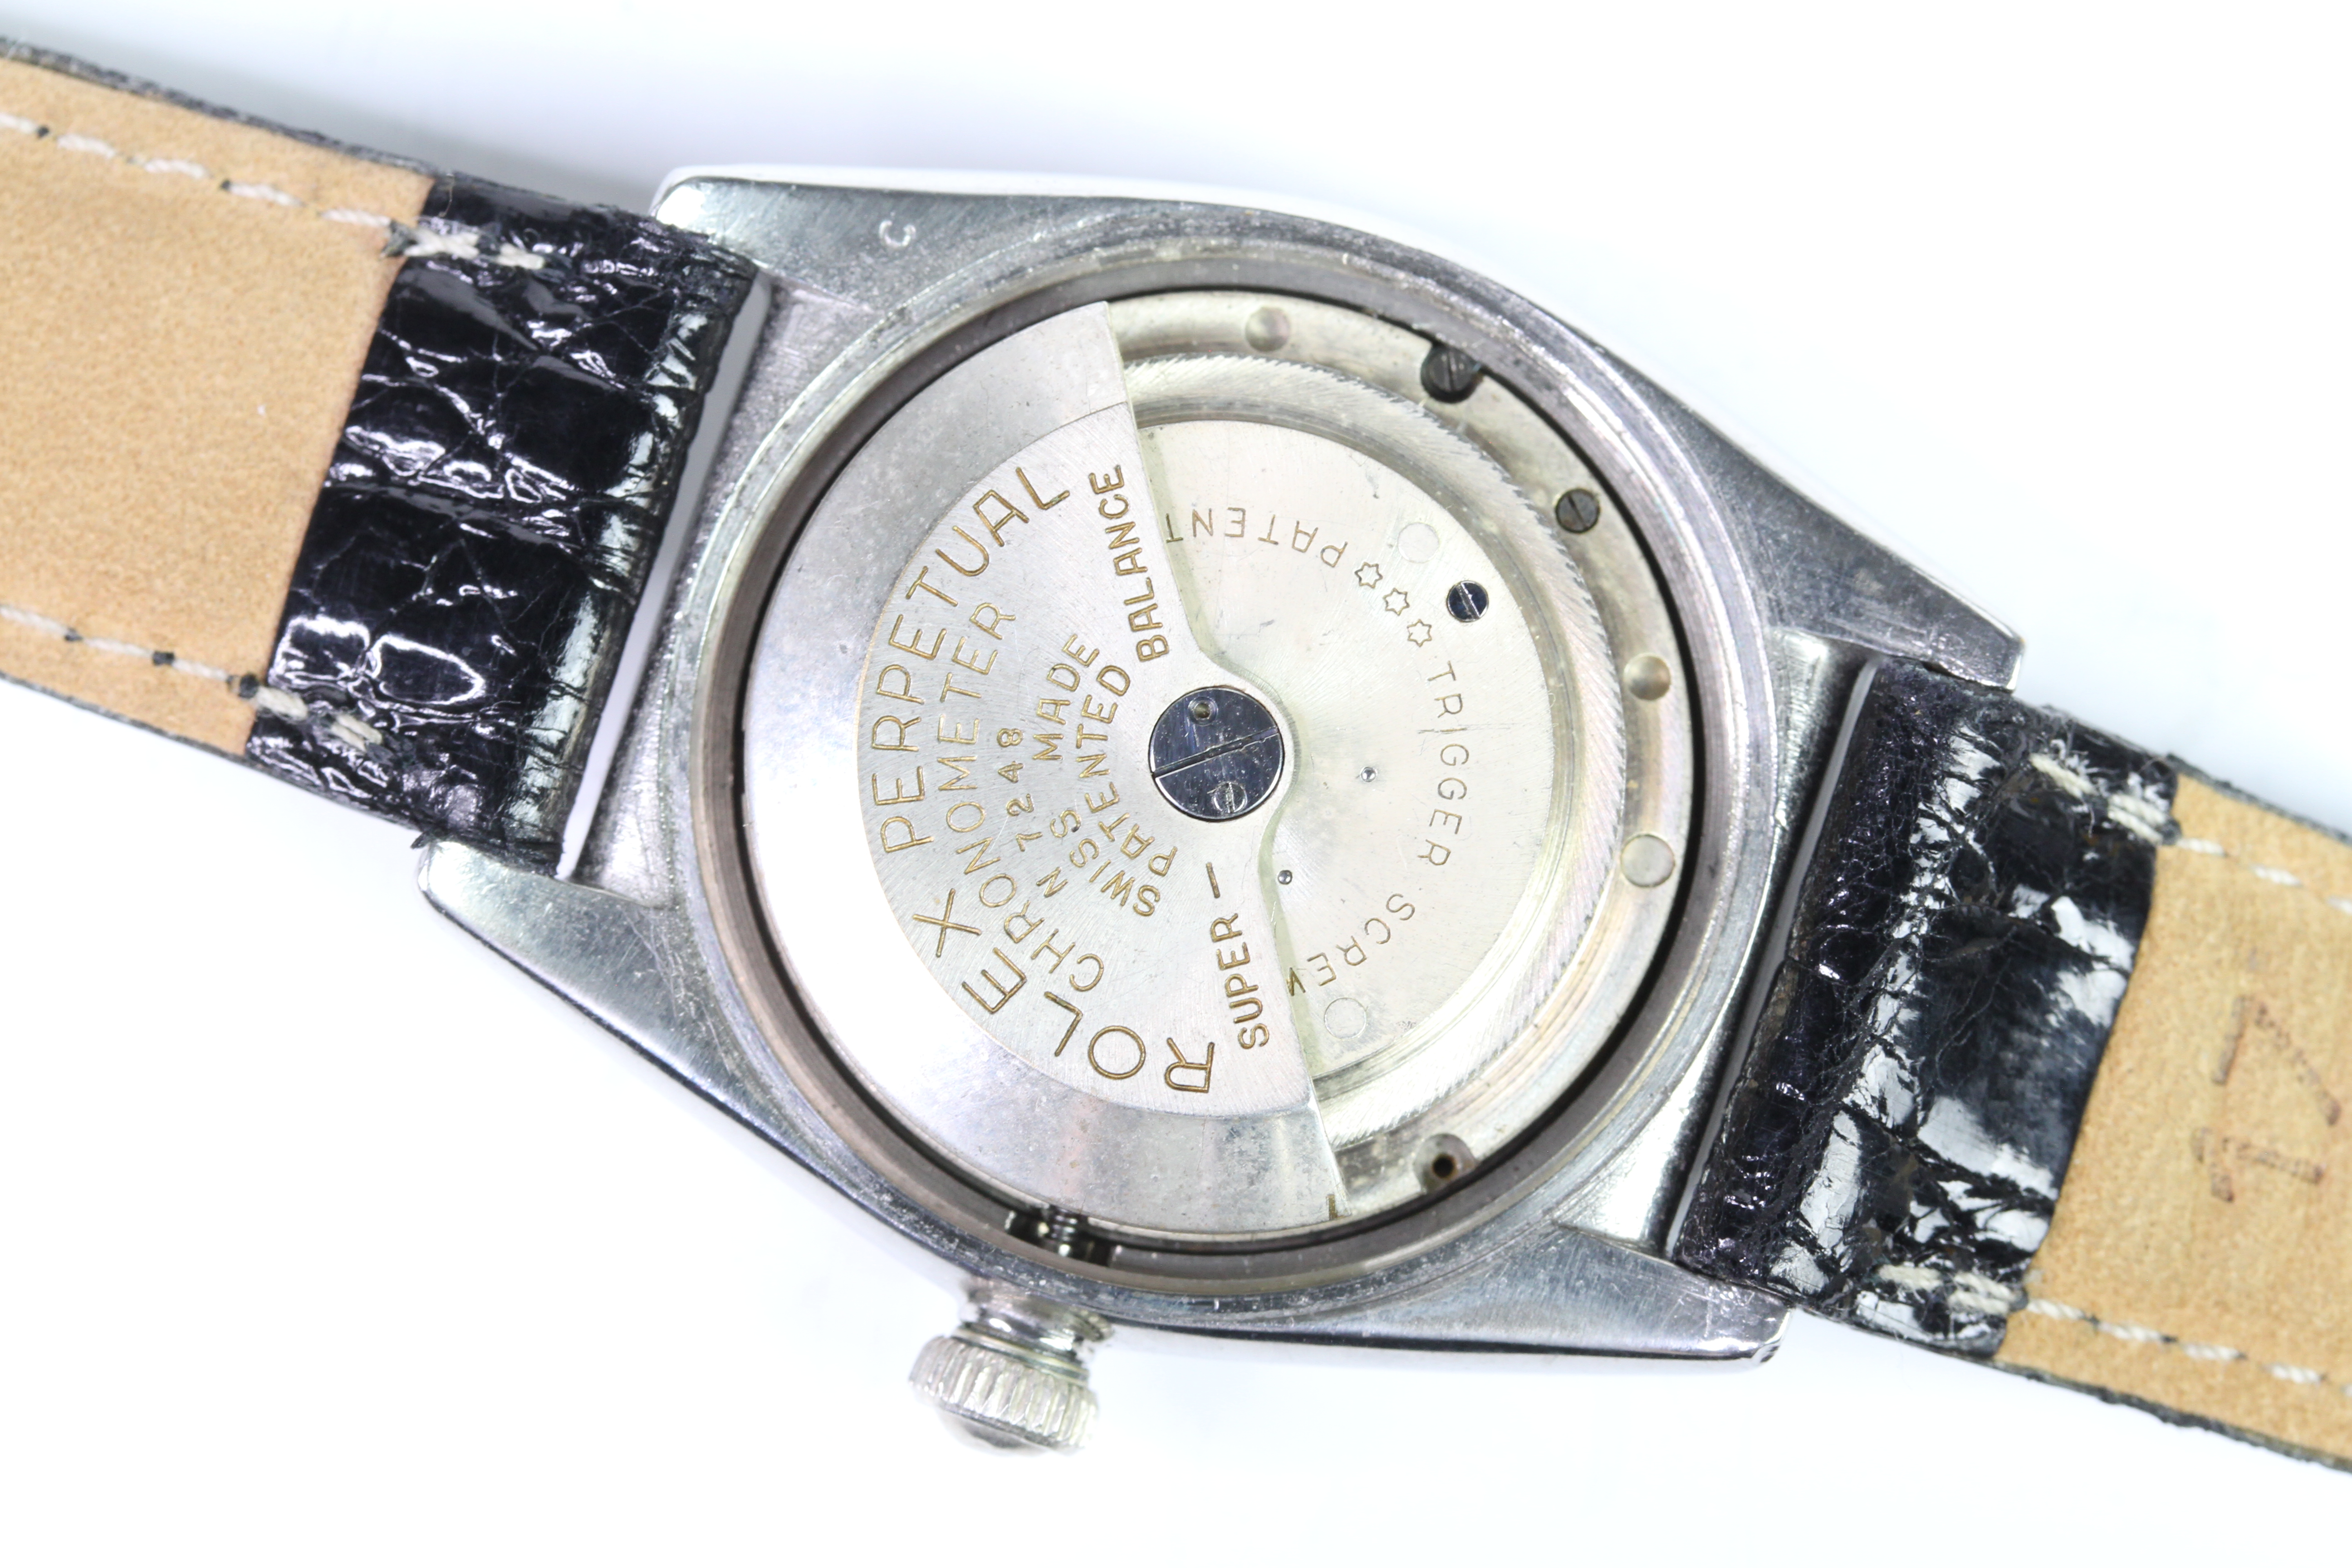 ROLEX OYSTER PERPETUAL 'BUBBLE BACK' REFERENCE 3372 CIRCA 1940s - Image 5 of 6